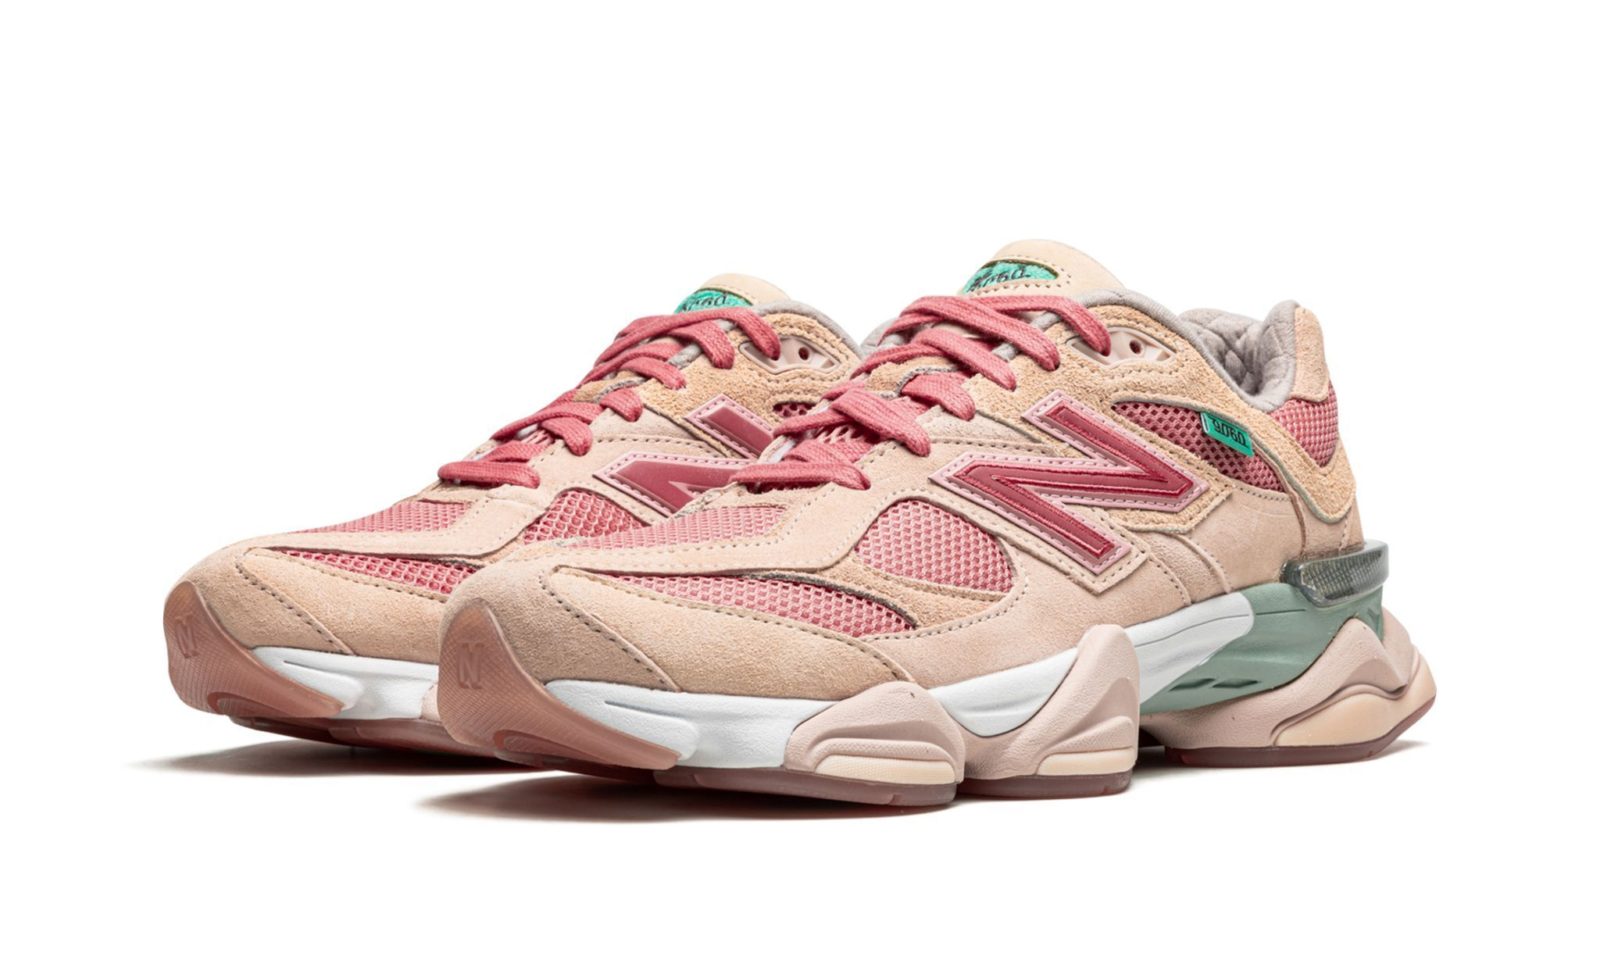 new-balance-9060-joe-fresh-goods-inside-voices-penny-cookie-pink_18519107_43170039_2048